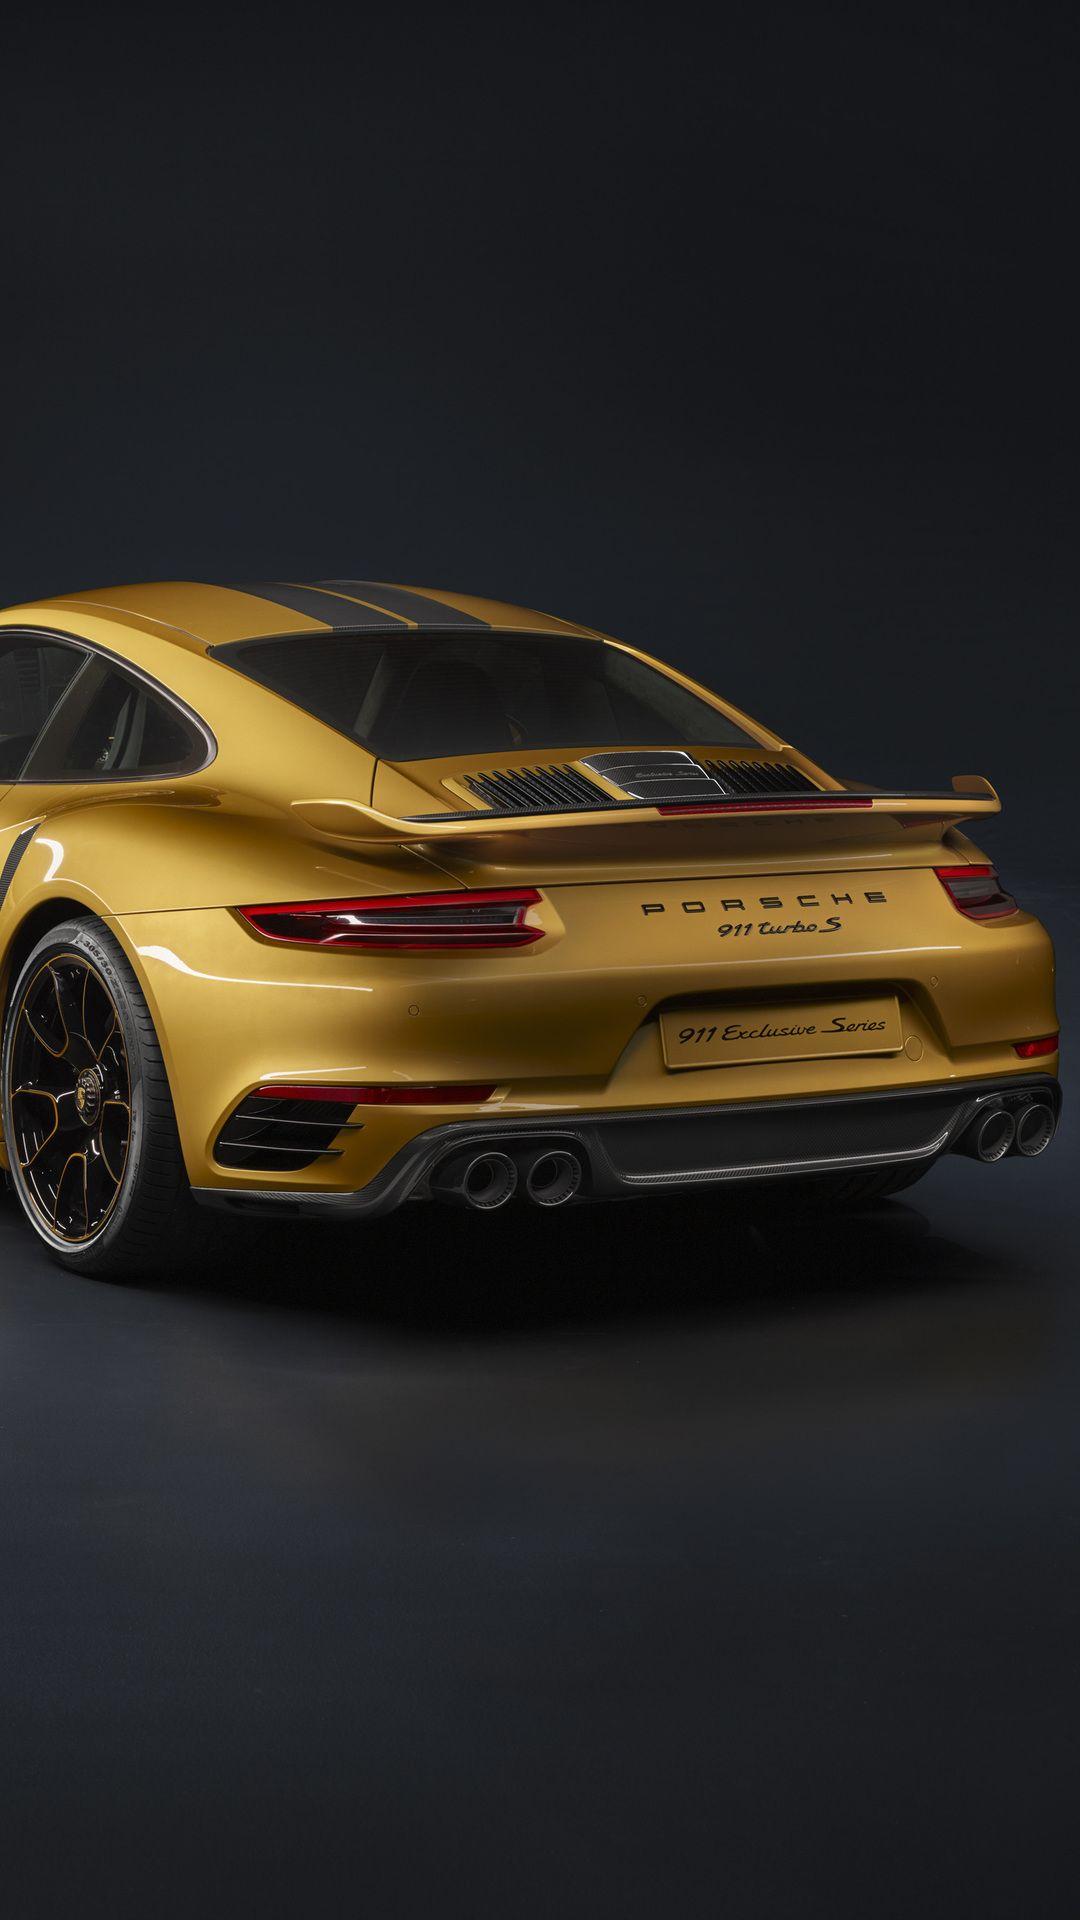 Porsche 911 Turbo S Exclusive SeriesK wallpaper, free and easy to download